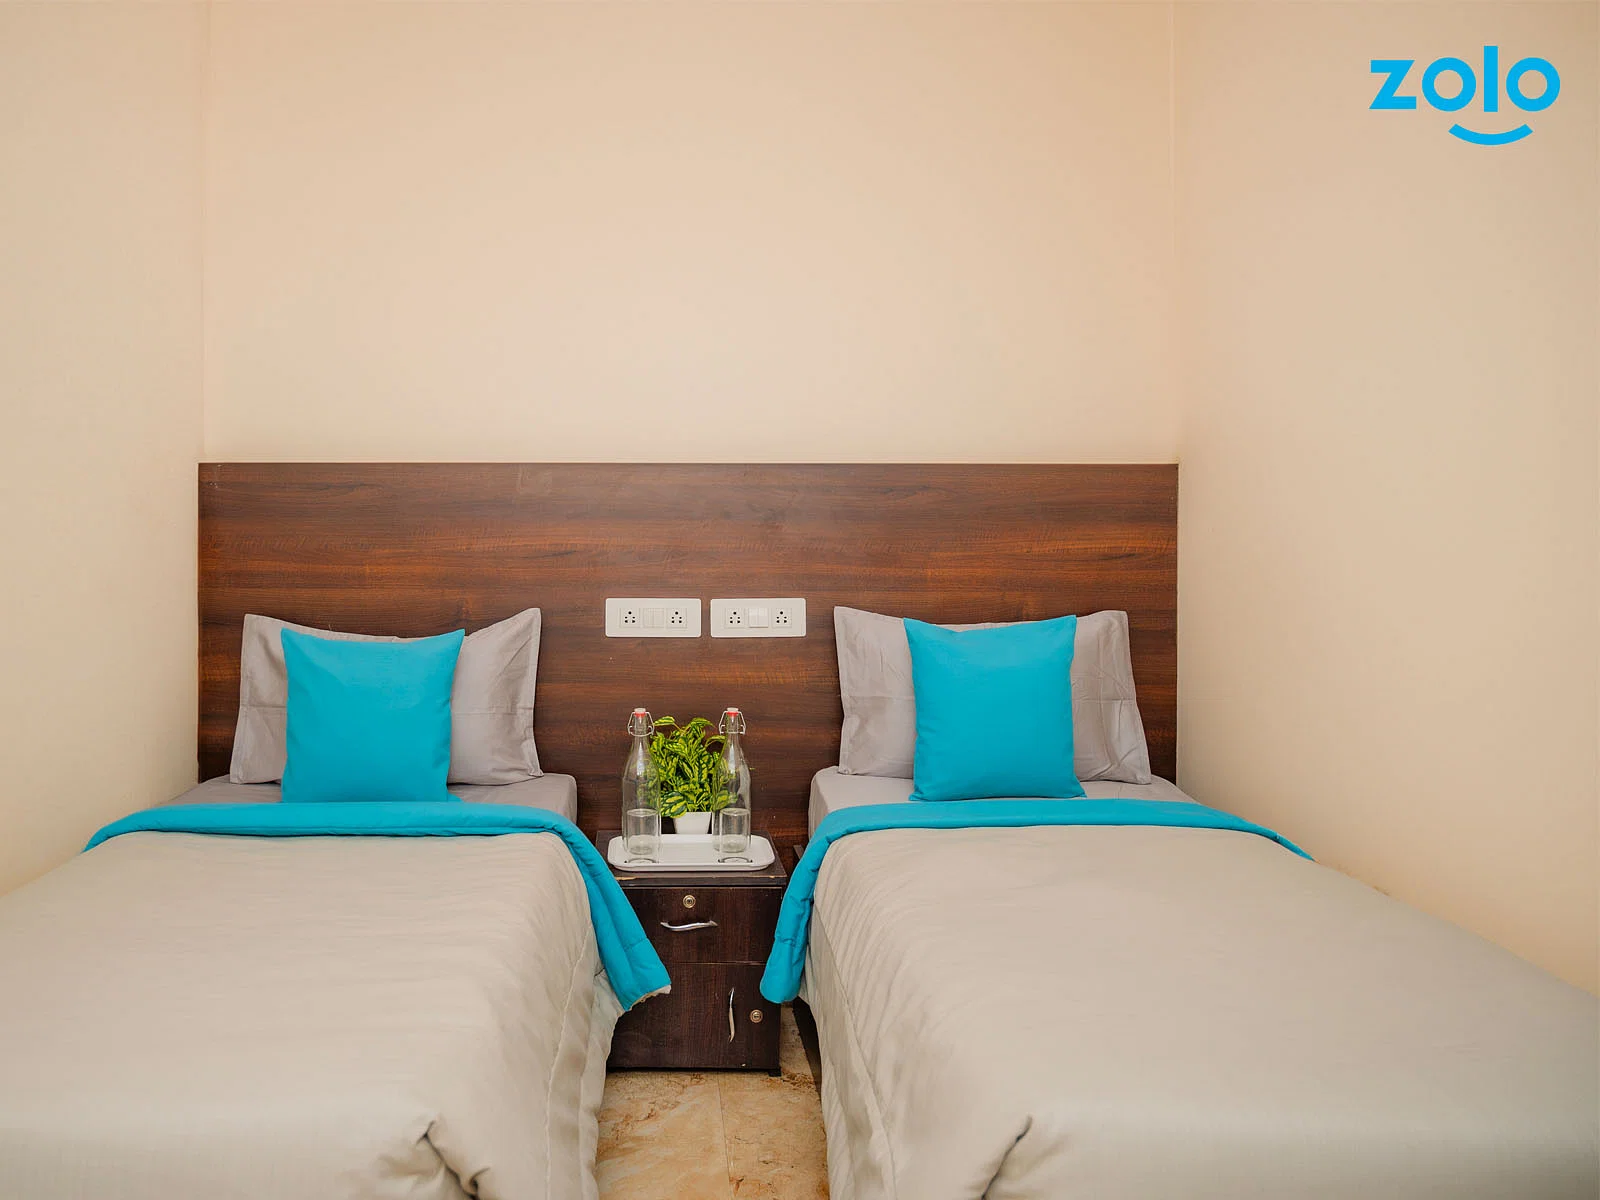 safe and affordable hostels for men and women students with 24/7 security and CCTV surveillance-Zolo Lance